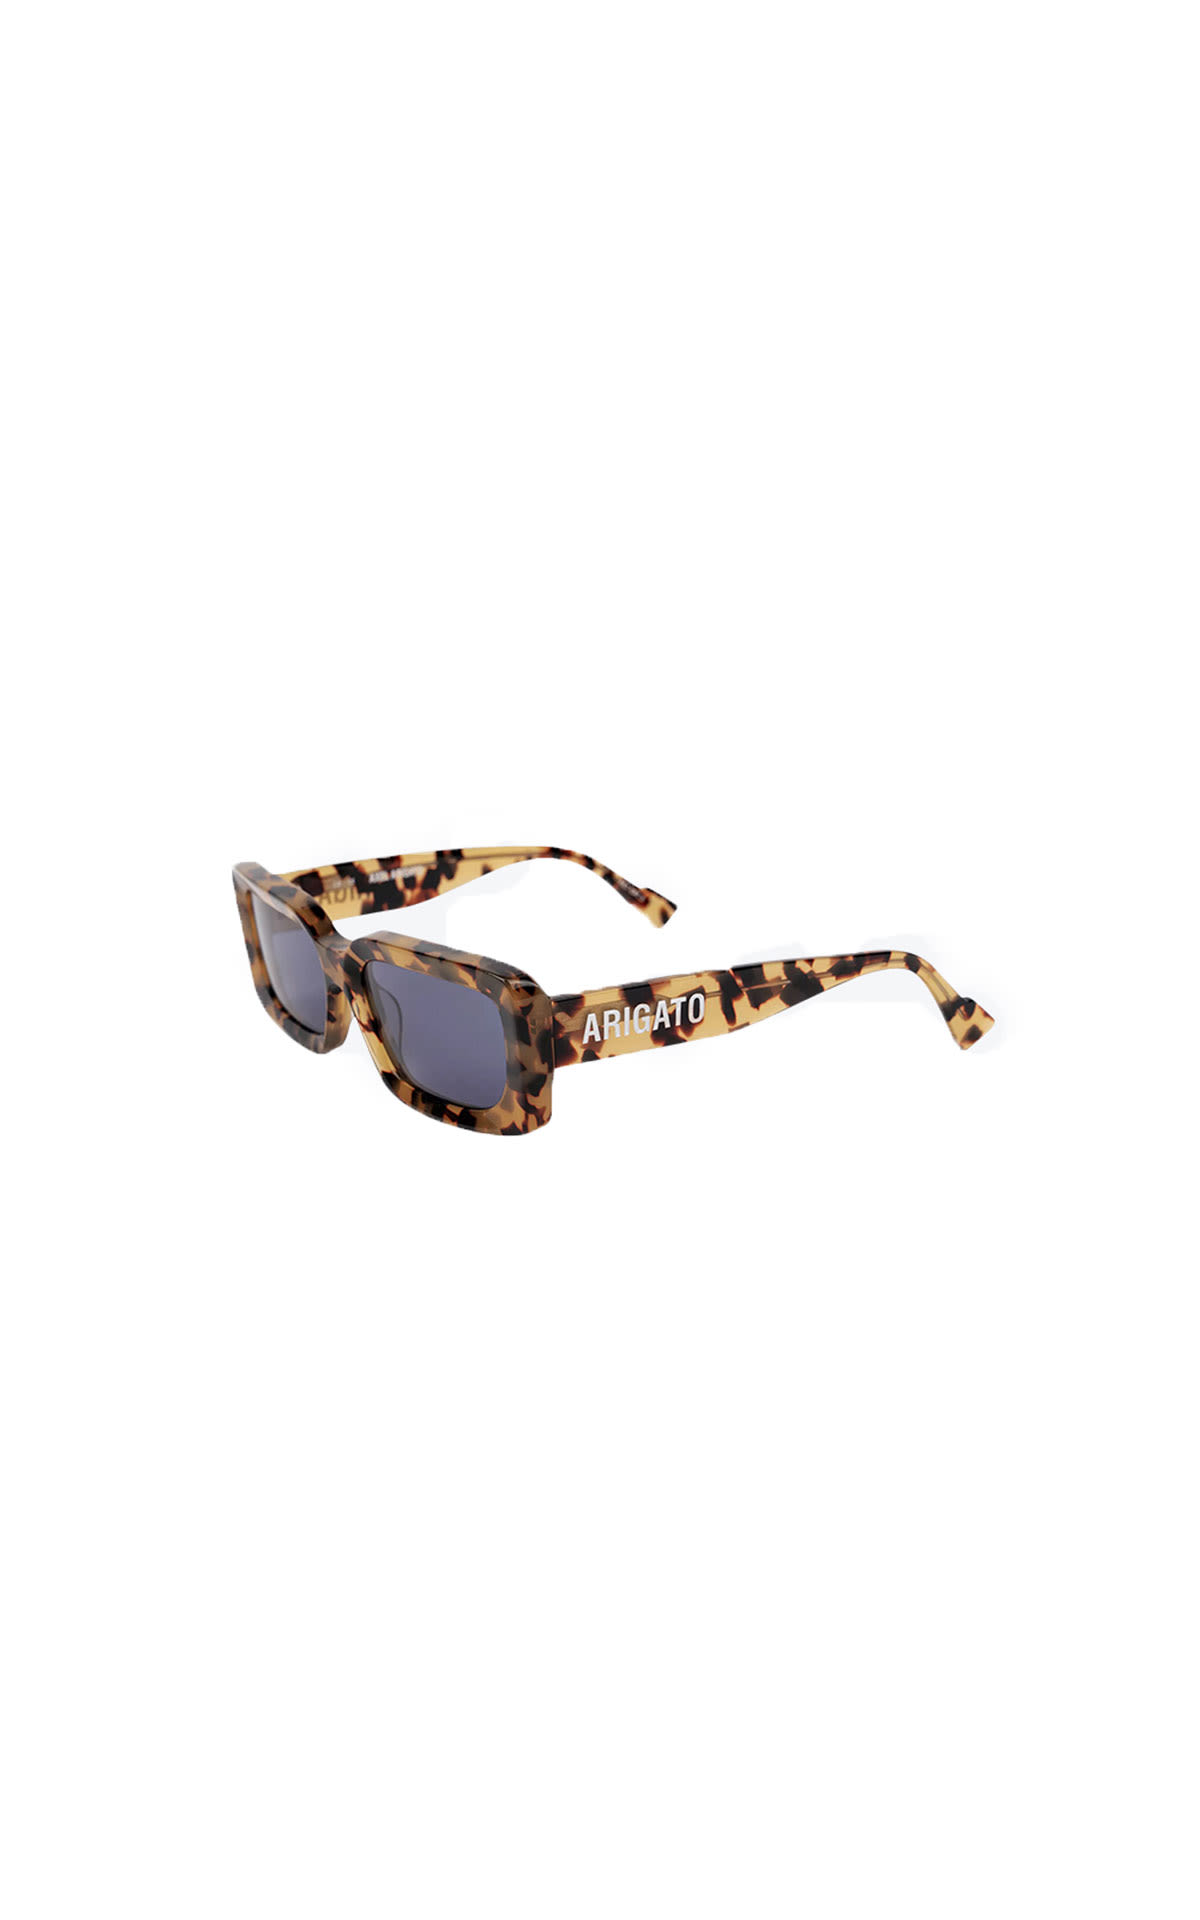 Axel Arigato Sunglasses from Bicester Village